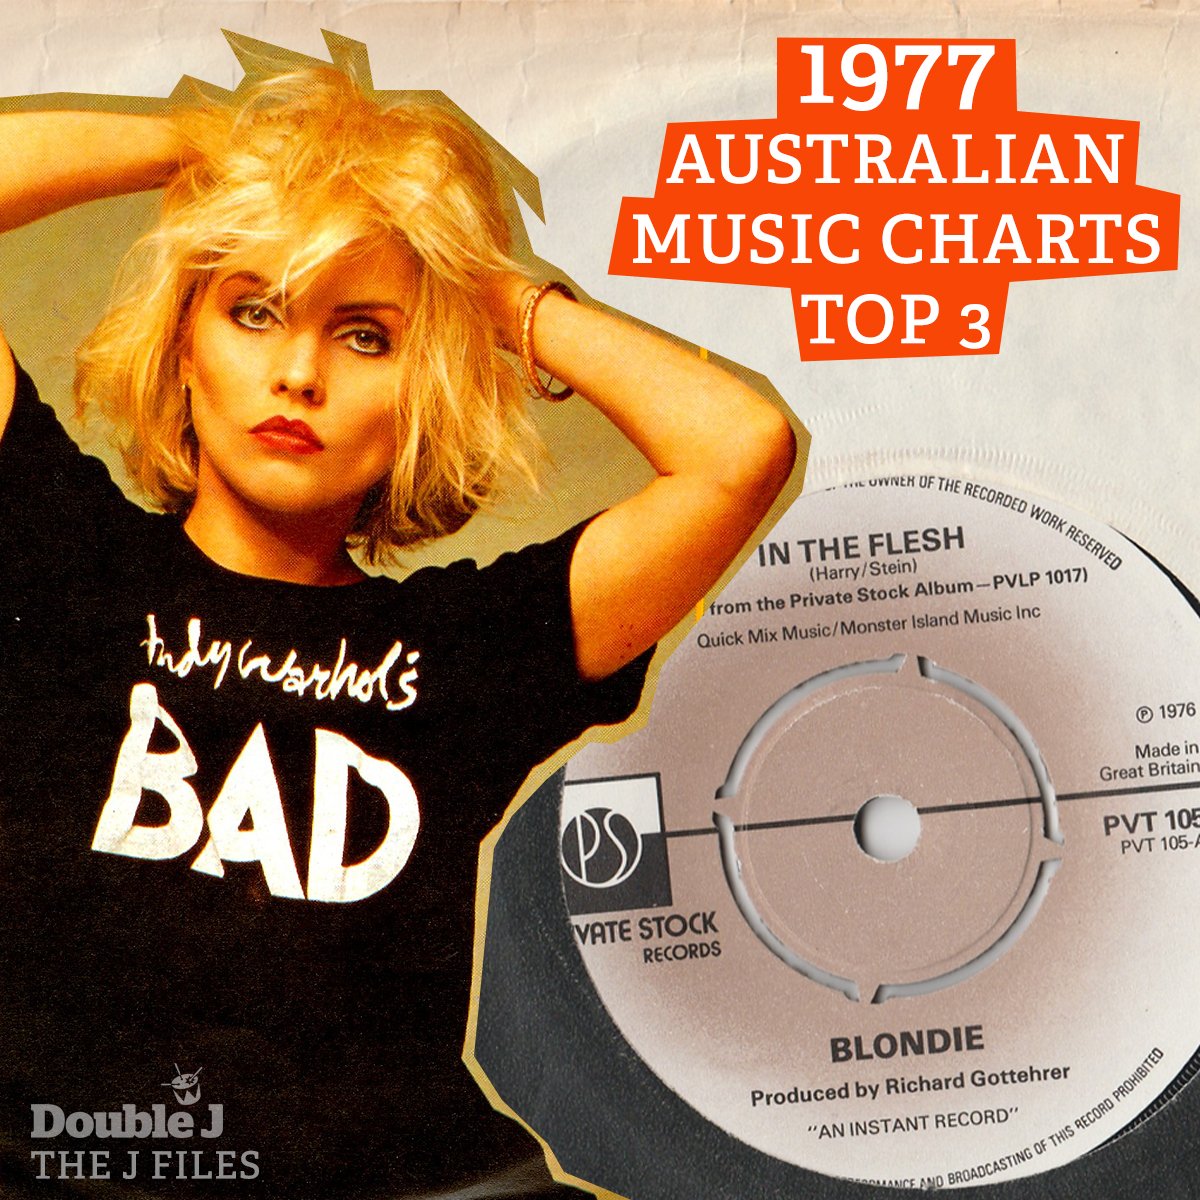 Blondie Long Time Charts